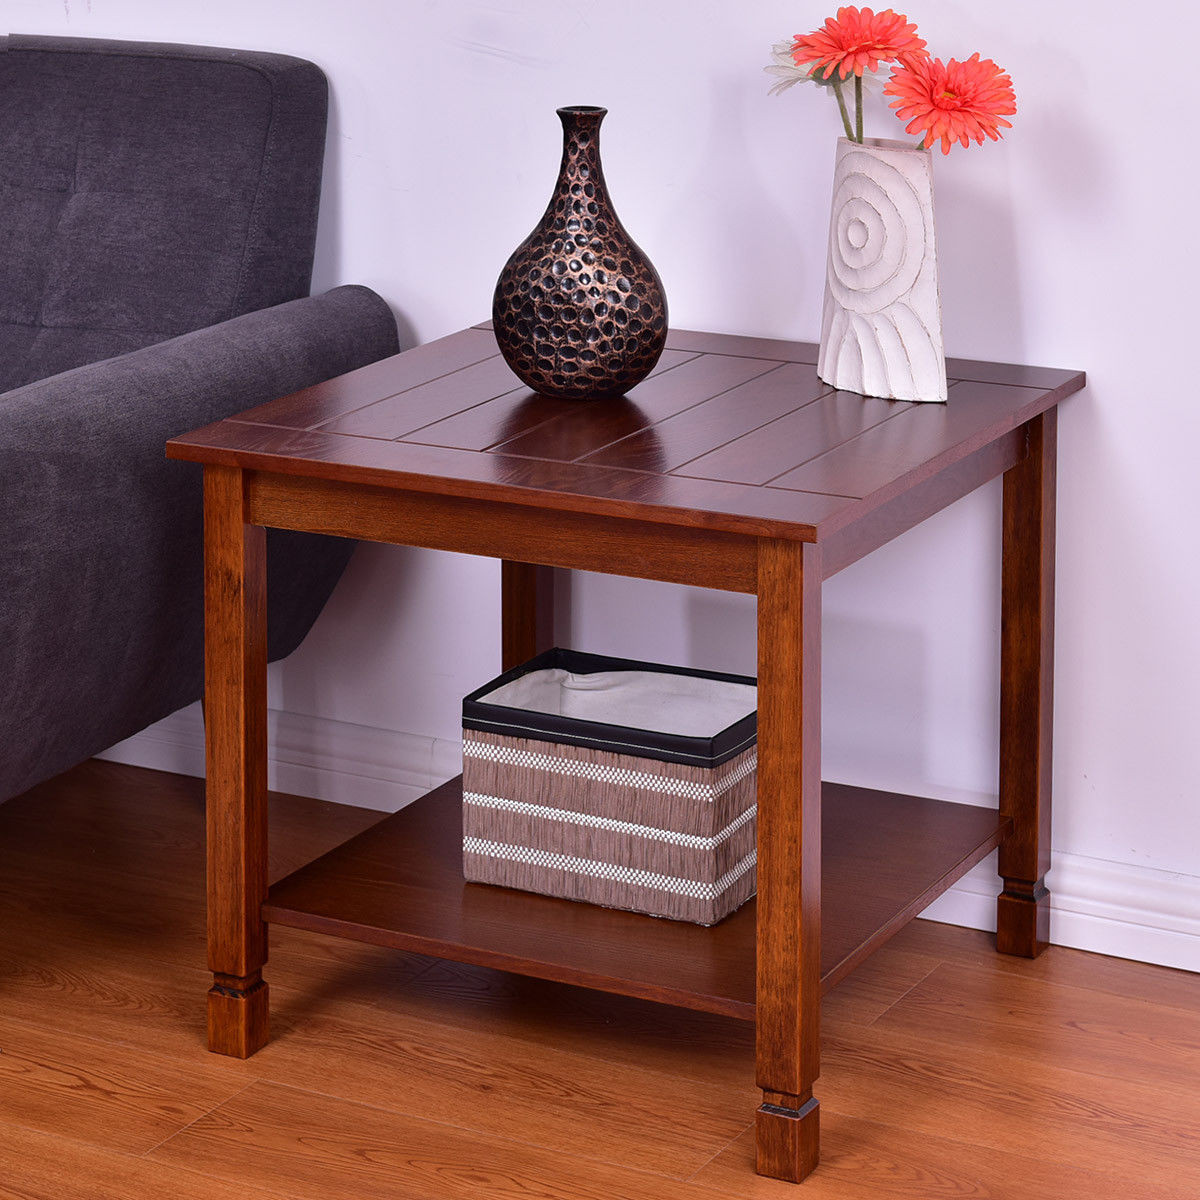 Living Room Side Tables
 Giantex Wood Side Table Living Room End Table Night Stand